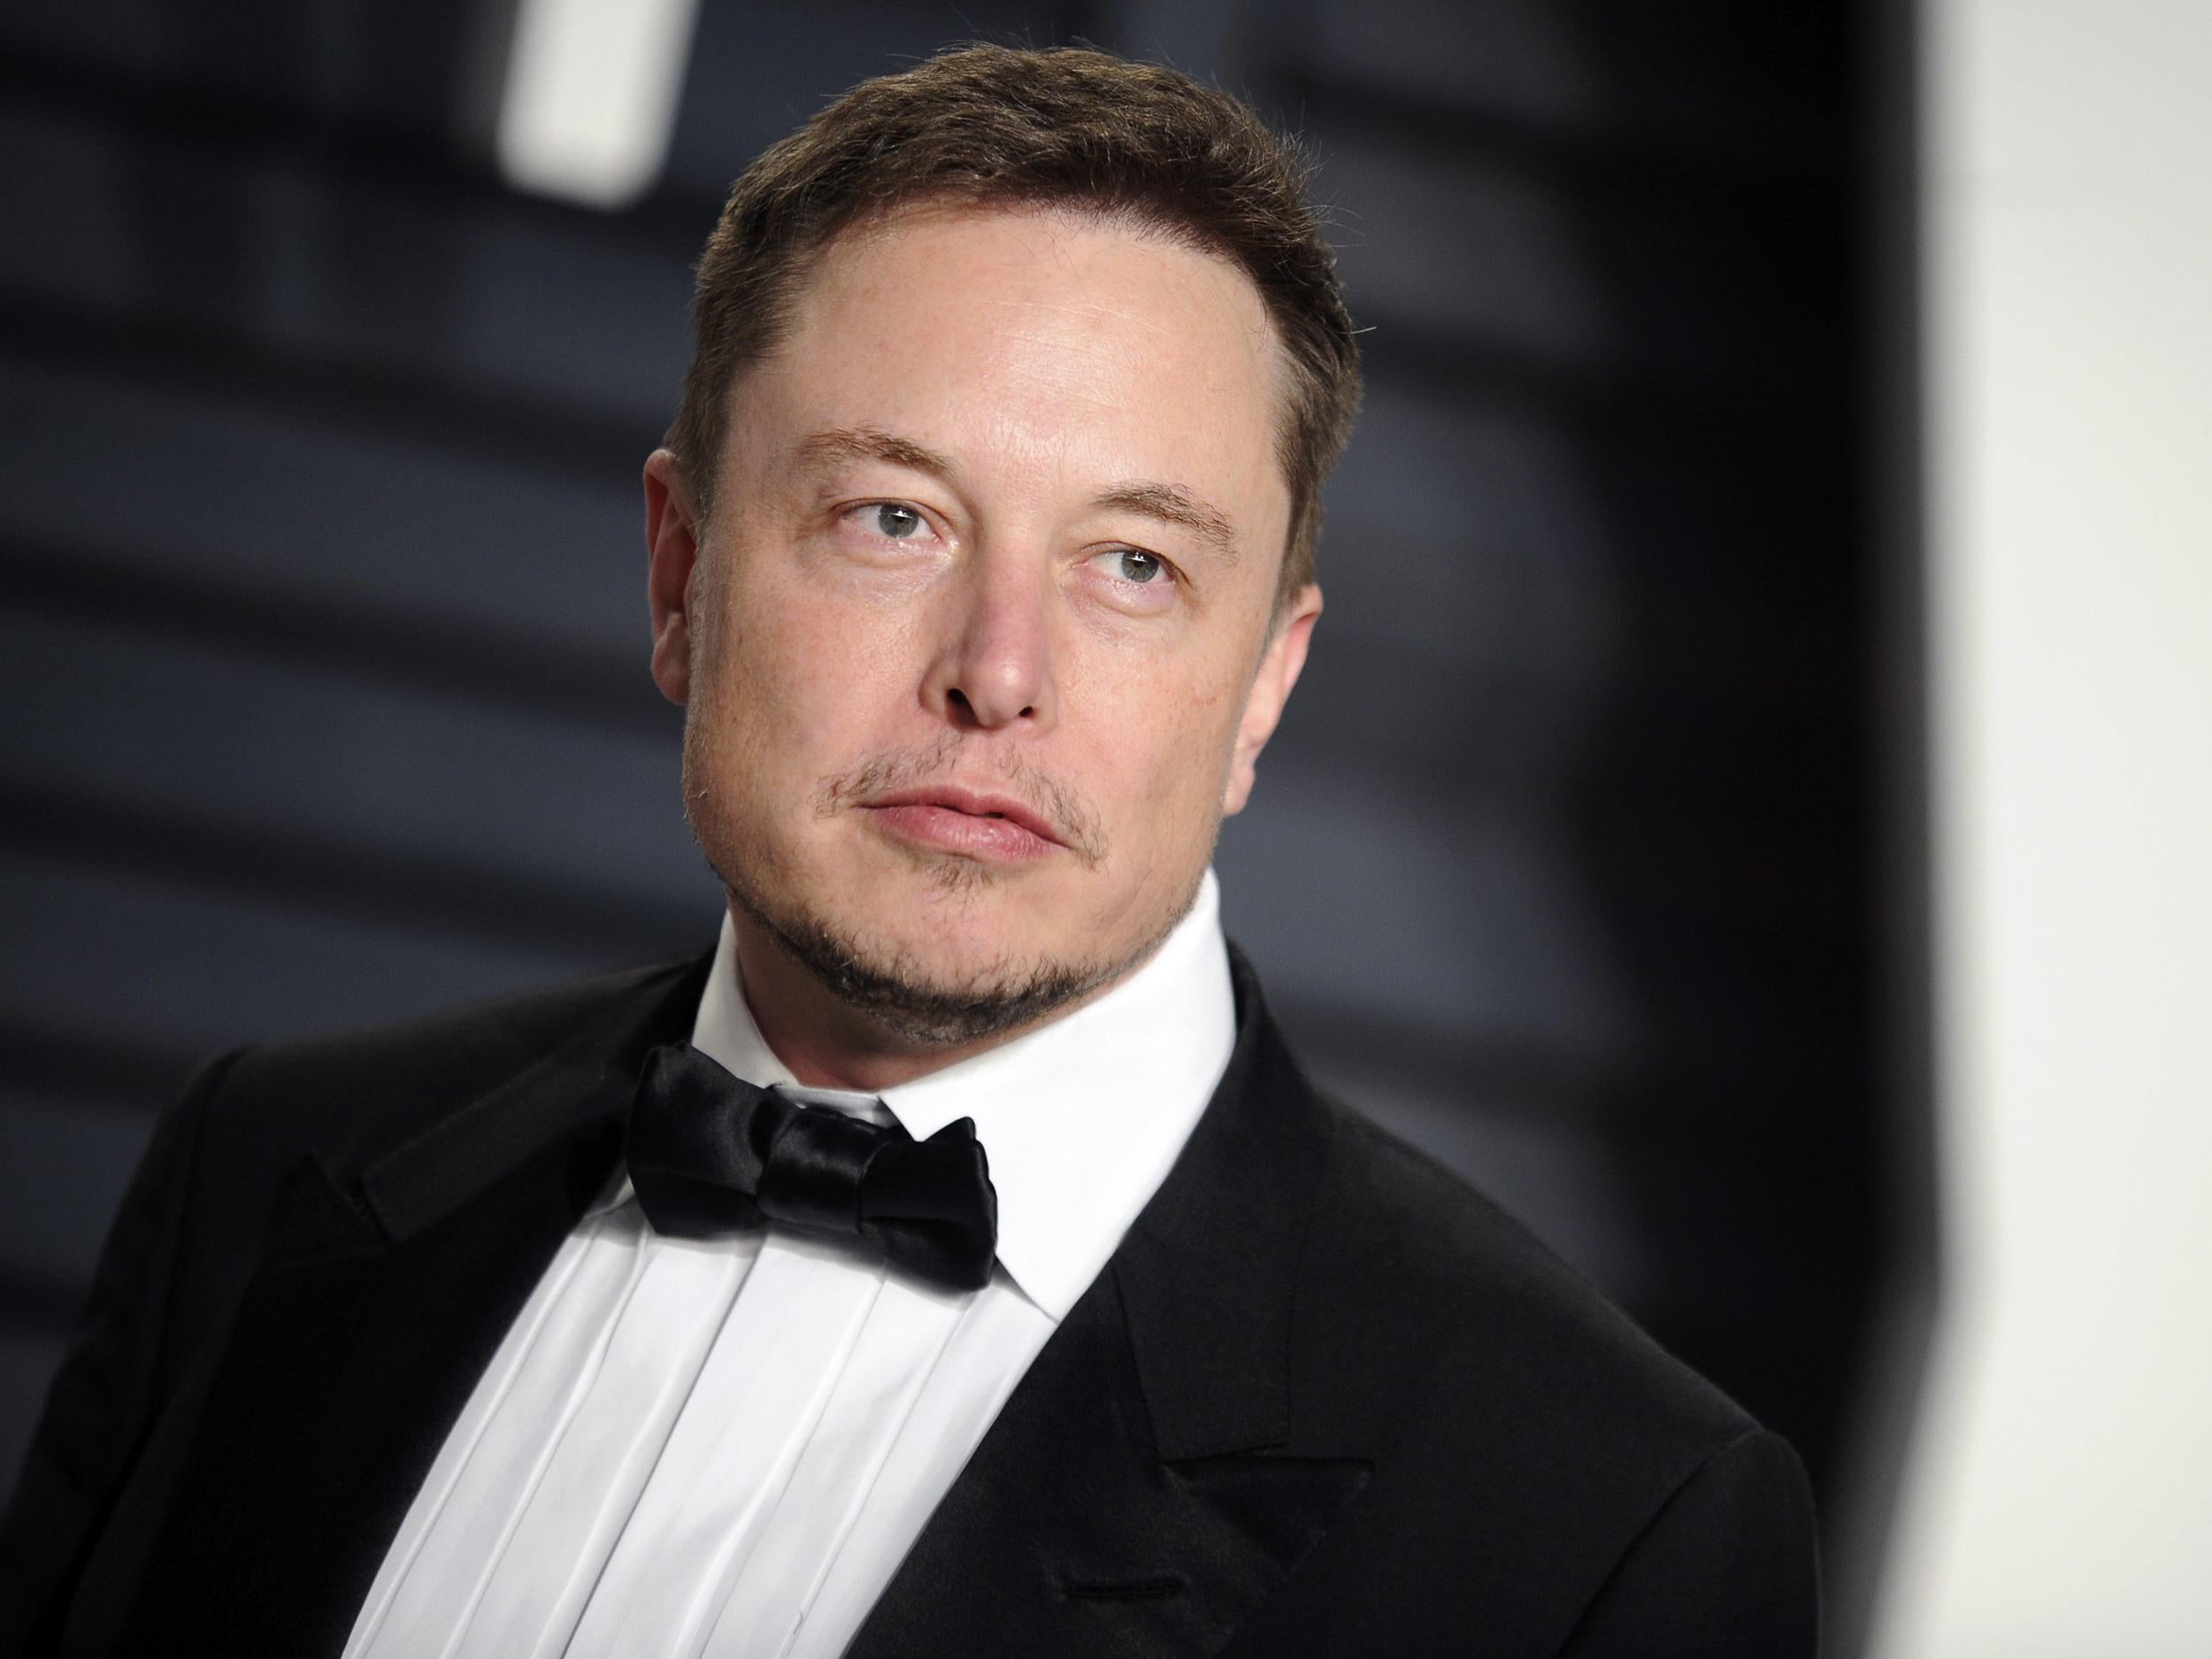 Elon Musk Net Worth: Elon Musk's Companies, College degree, Nationality and More